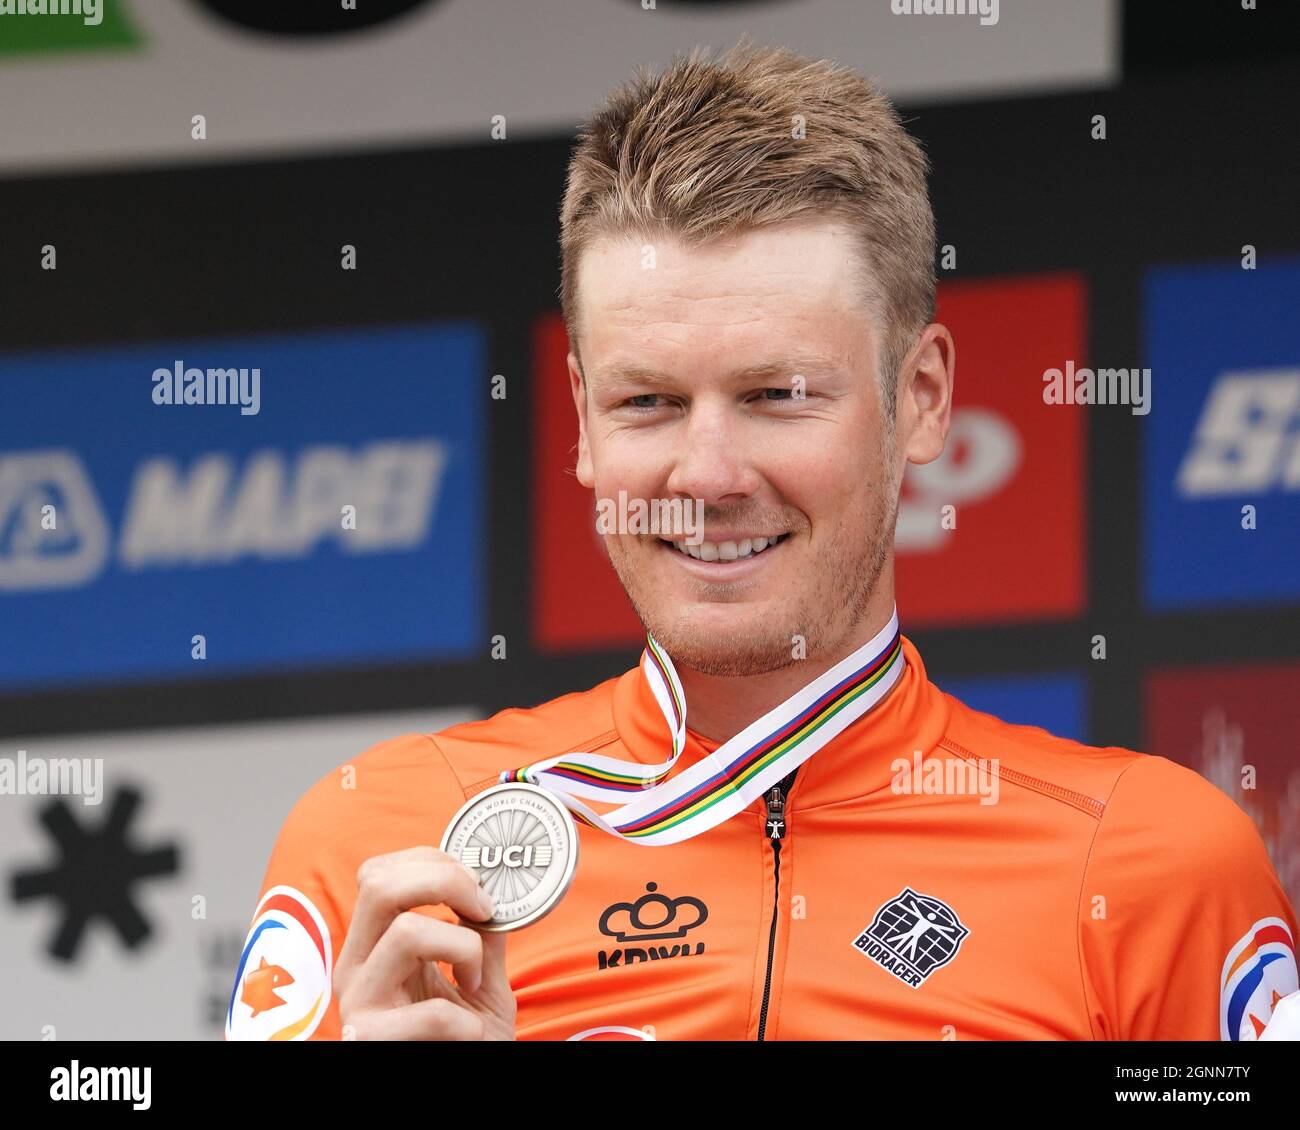 Dylan Van Baarle (NED) pictured on the podium of the road race of the UCI World Championships Road Cycling Flanders 2021 on Sunday 26 September 2021 at Leuven in Belgium. Photo by SCS/Soenar Chamid/AFLO (HOLLAND OUT) Stock Photo